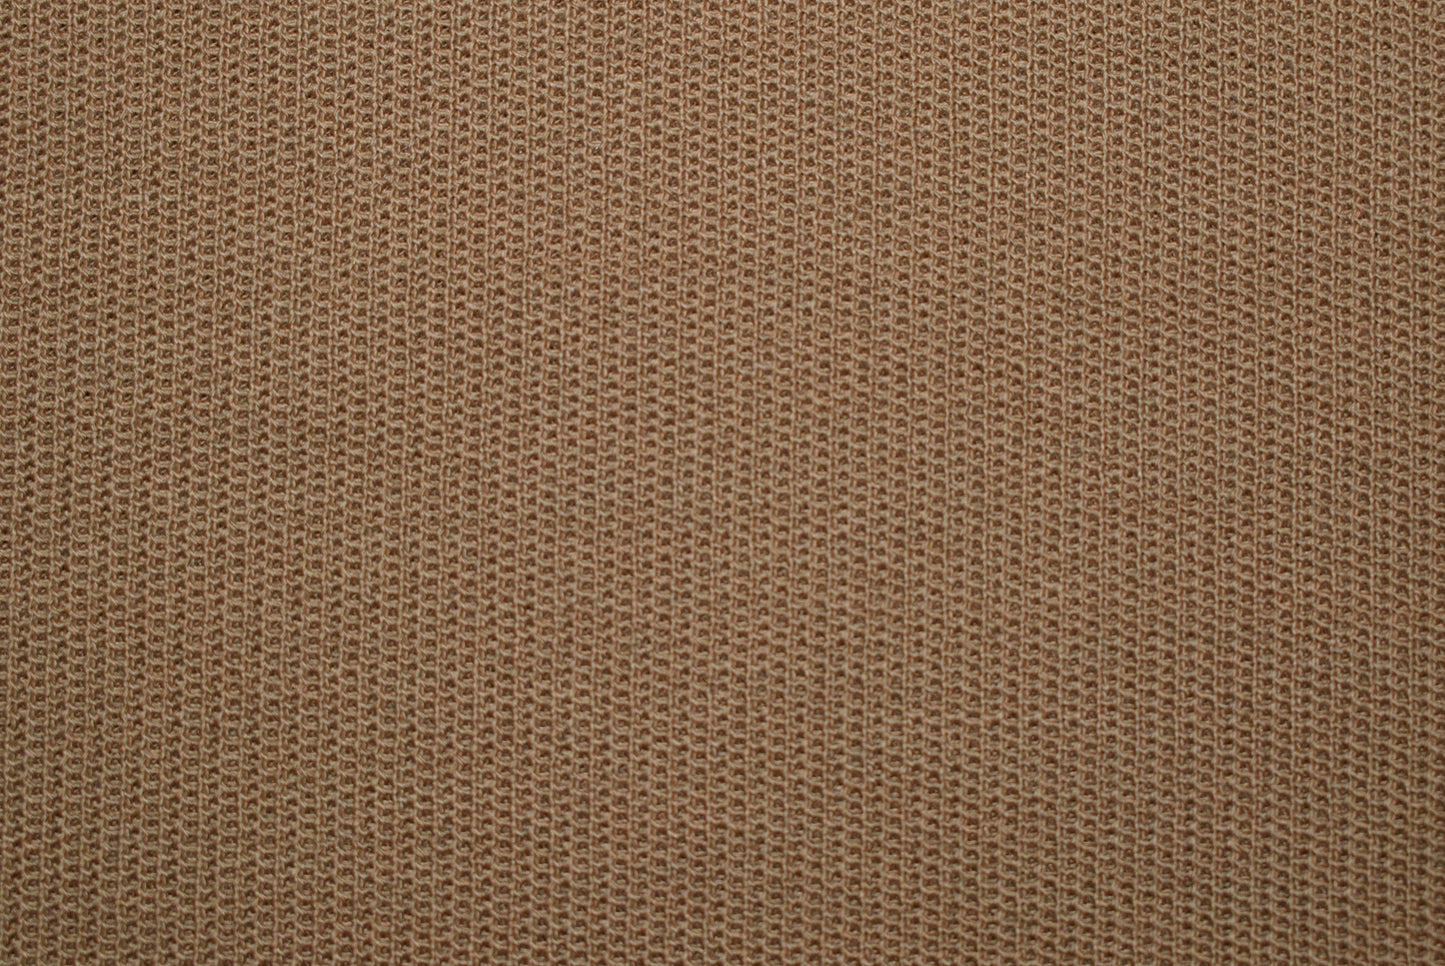 Honeycomb Knitted Wool